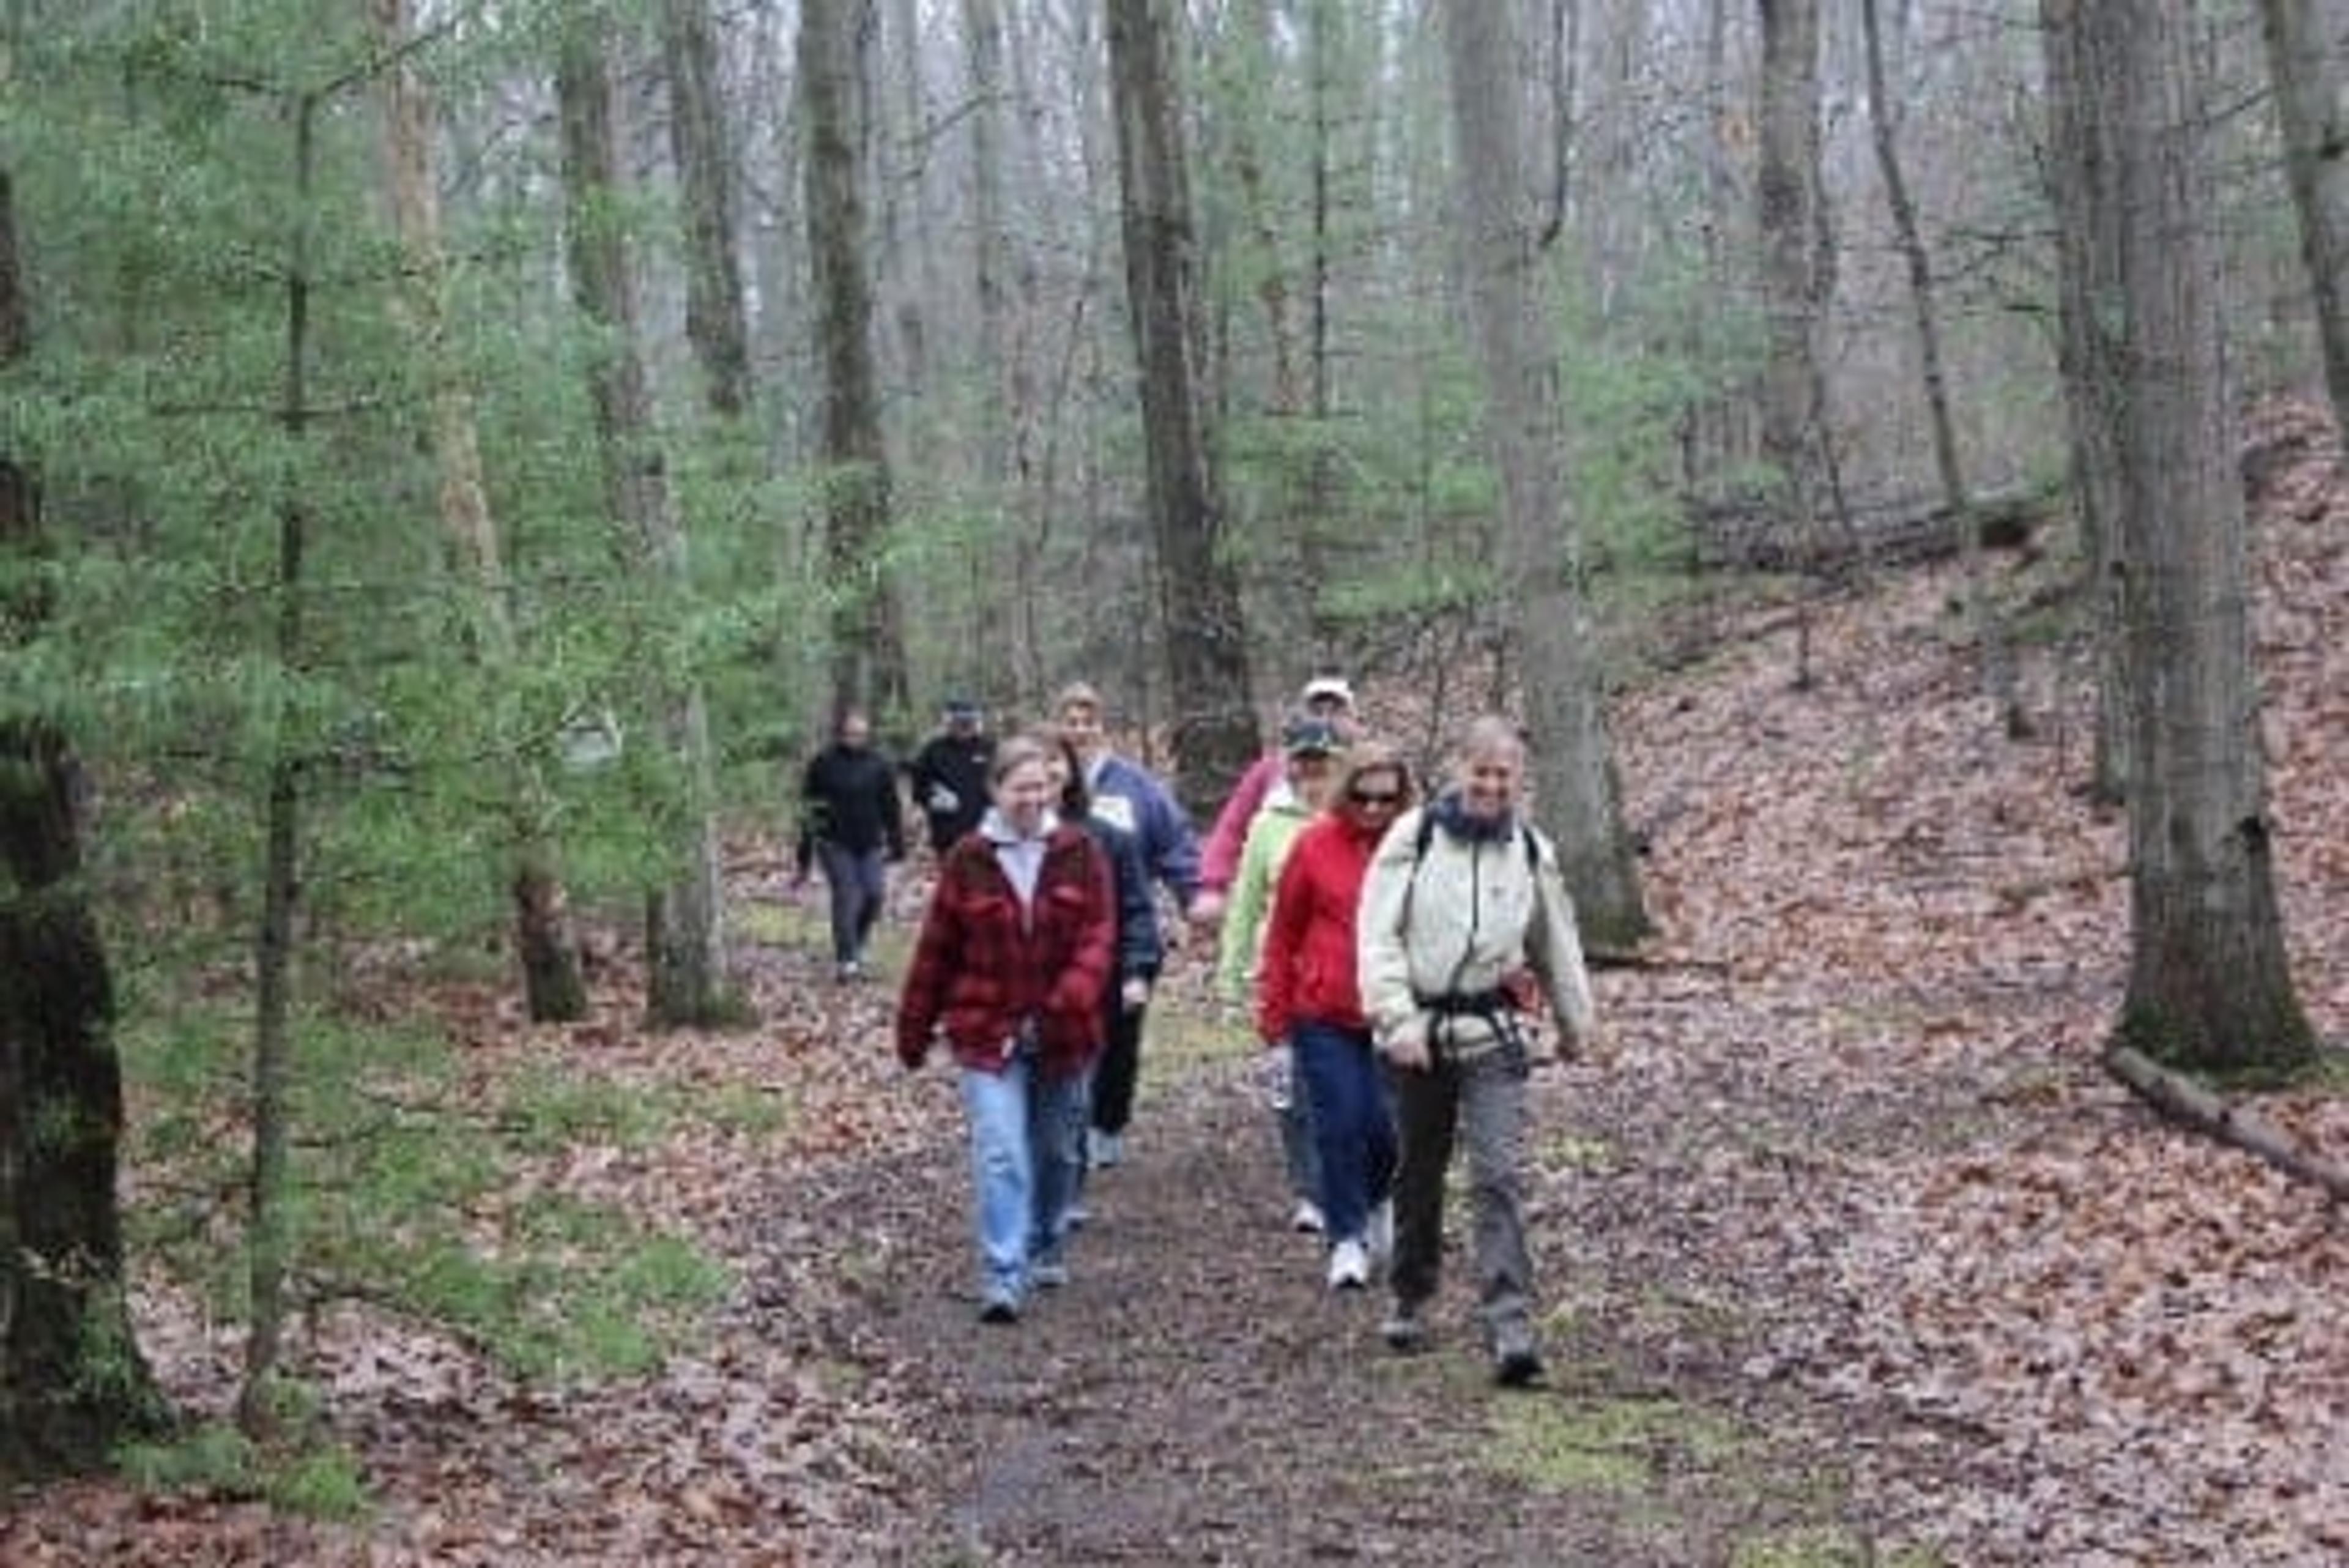 Ottawa County Step it Up walkers on the trail. (Courtesy photo)